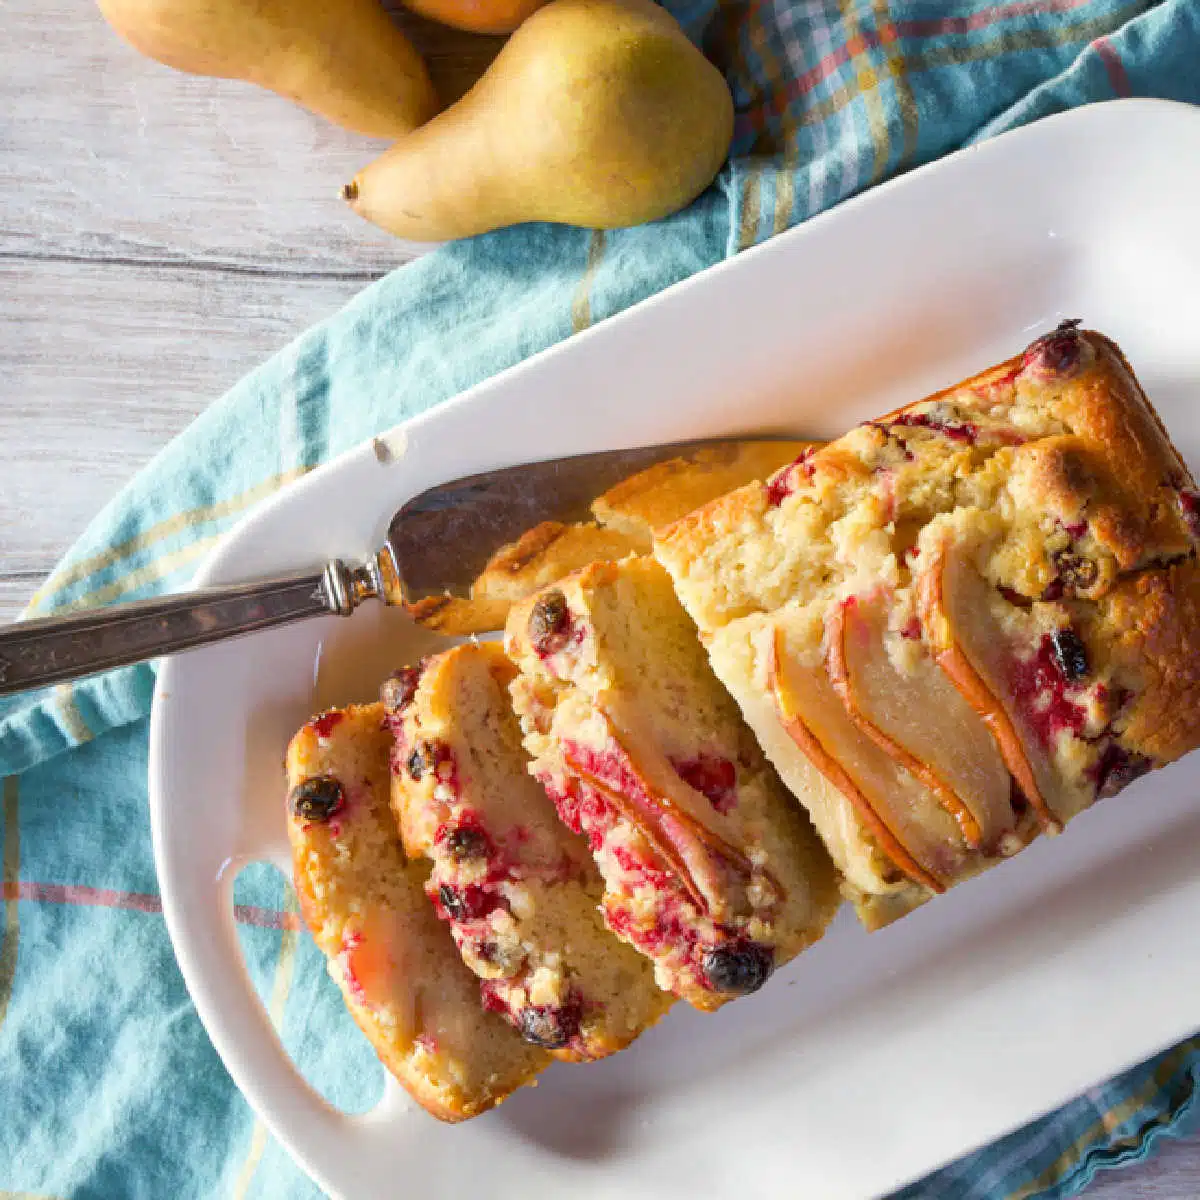 A serving platter of yogurt cake with pears, cranberries and chocolate chips.